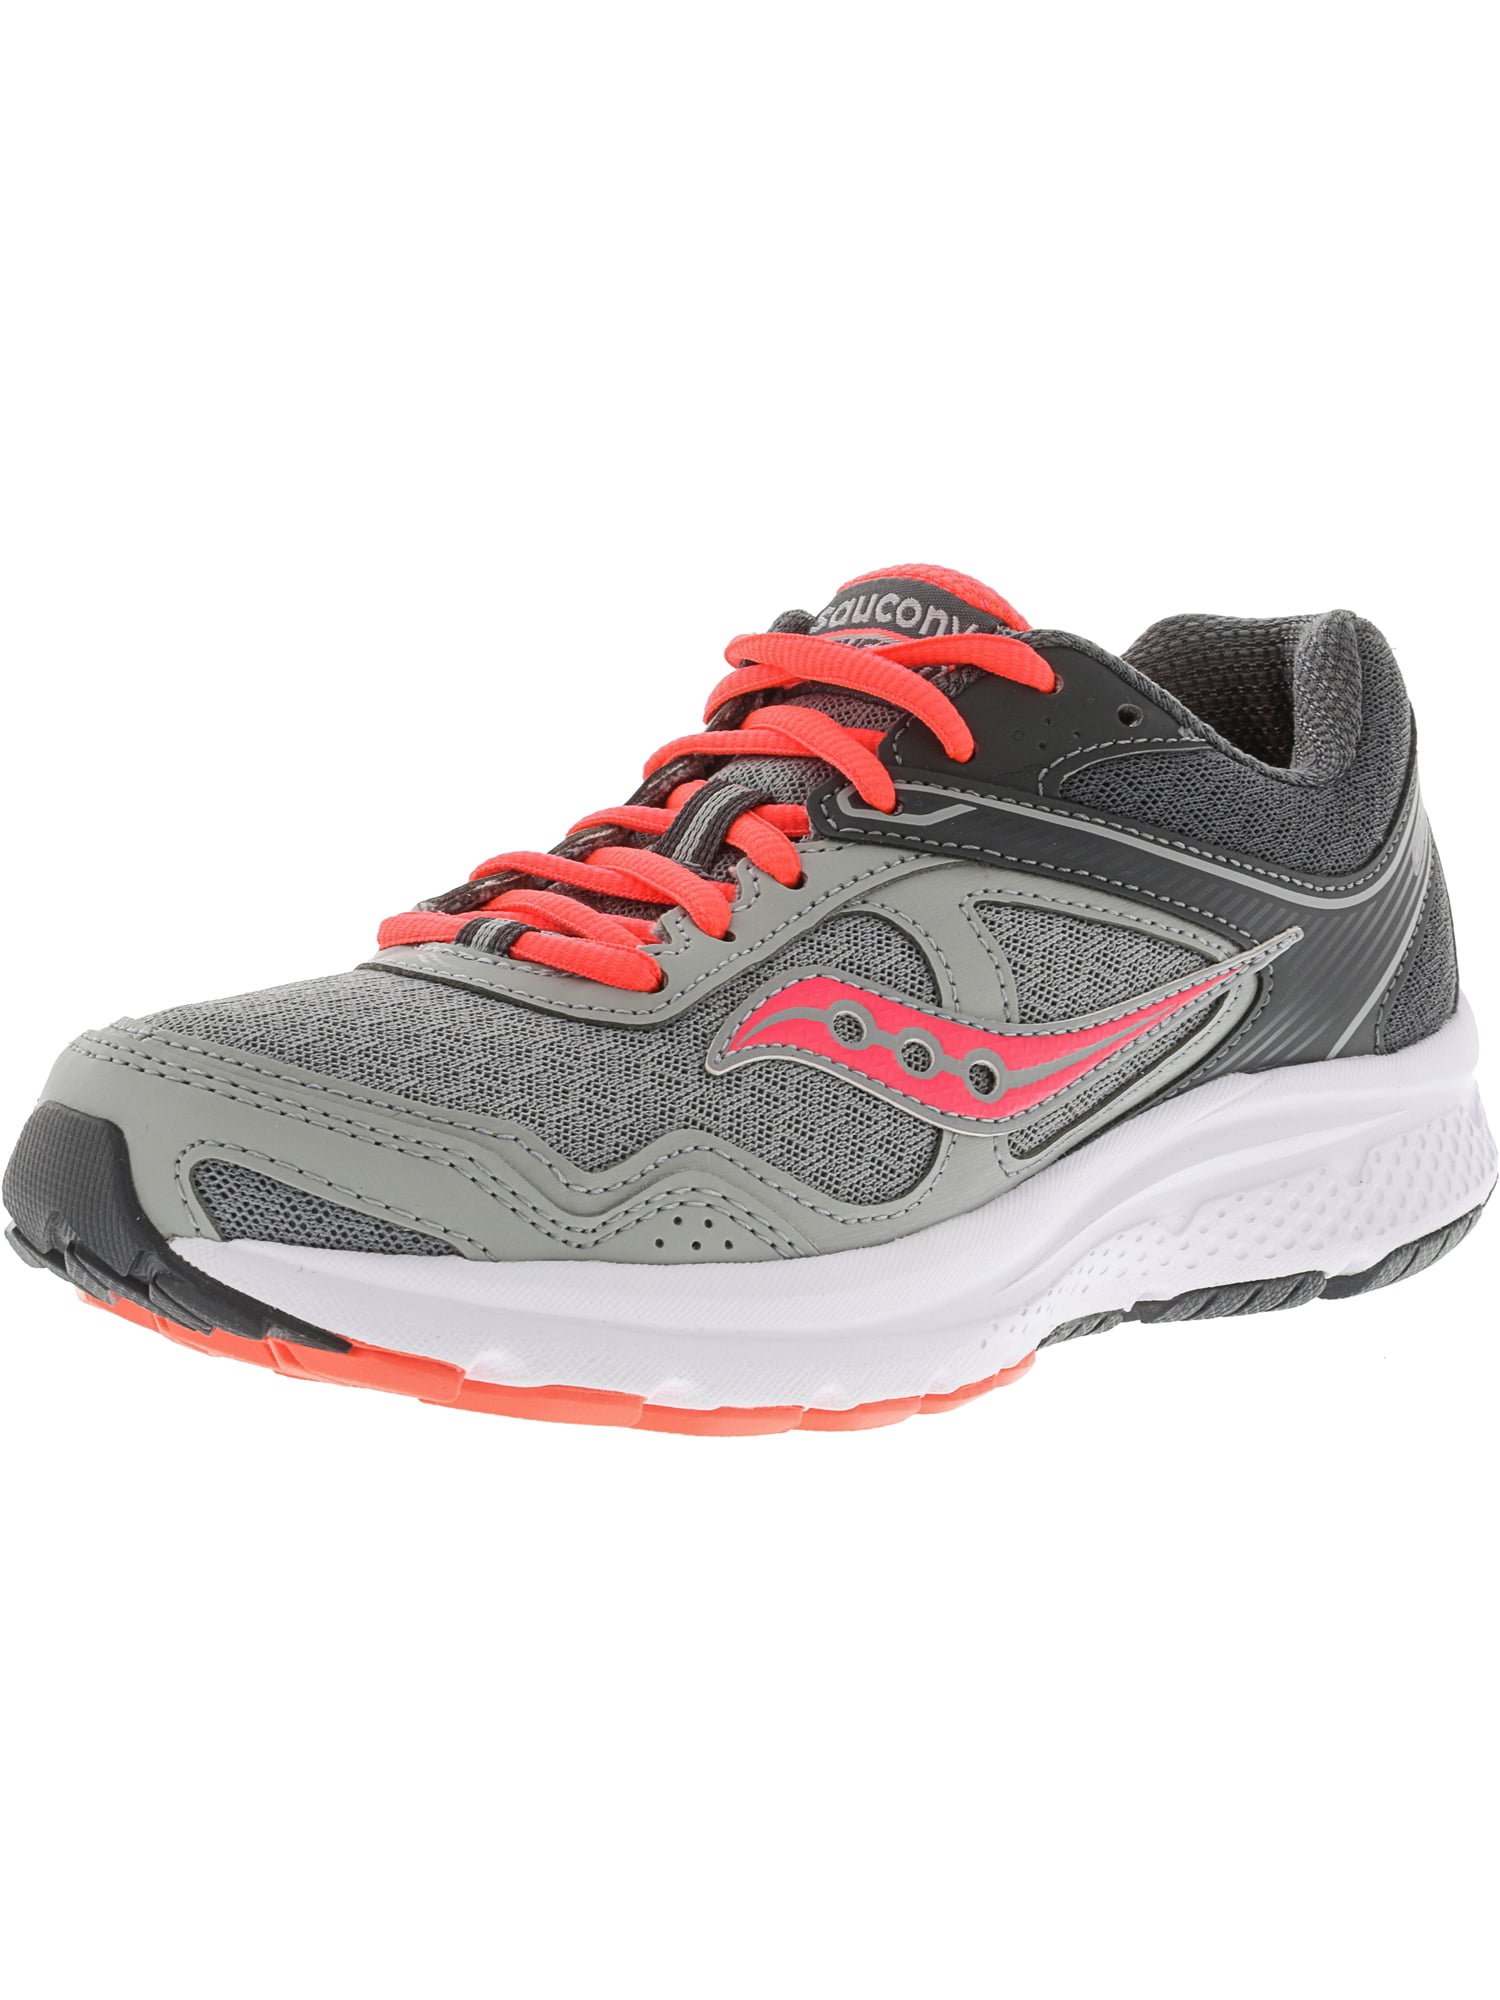 saucony cohesion 10 womens wide